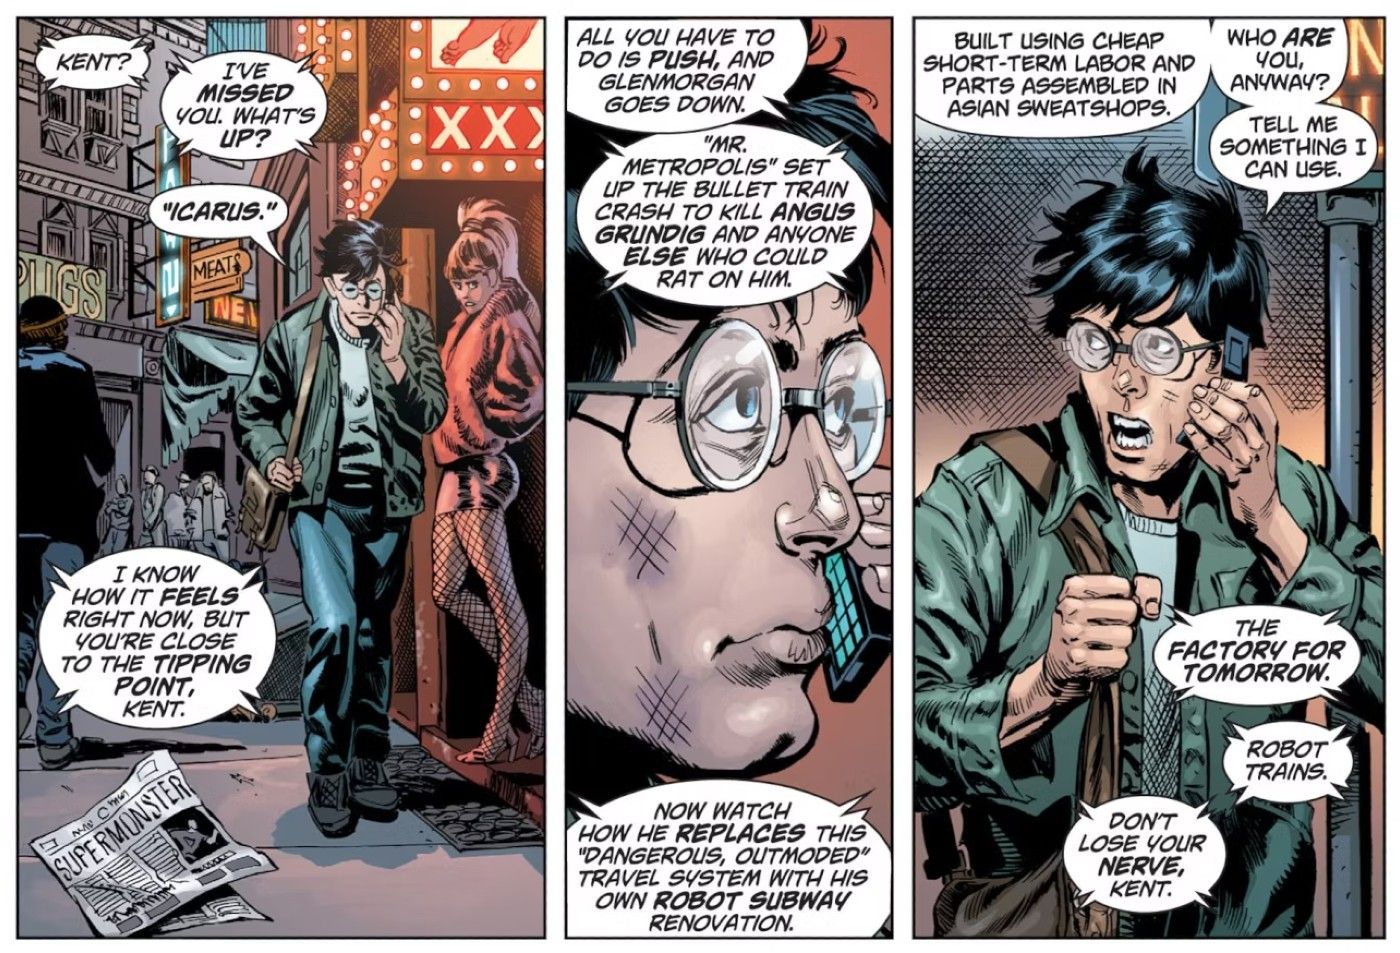 Clark Kent Owes His Career To His Biggest Source: Lex Luthor